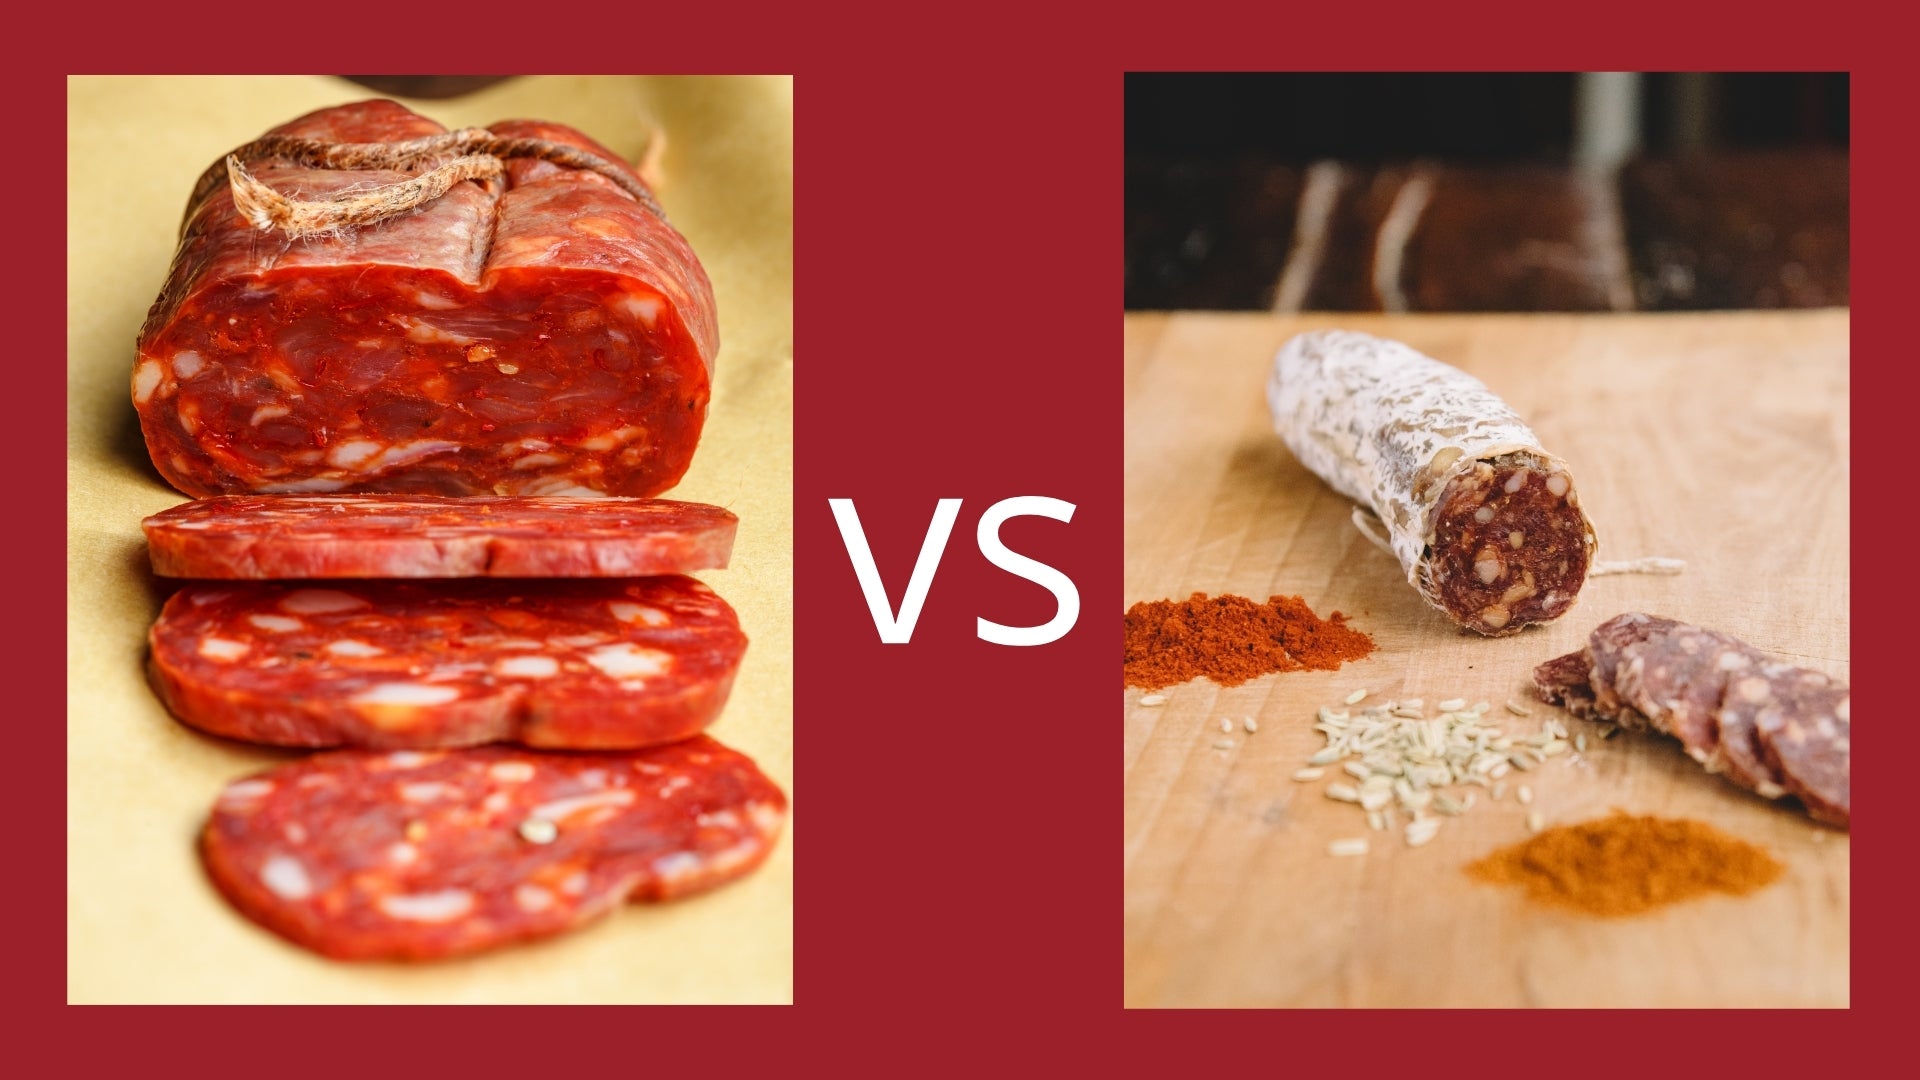 An image with a flattened soppressata salami on the left and a cylindrical salami on the right to show the difference between their shapes.